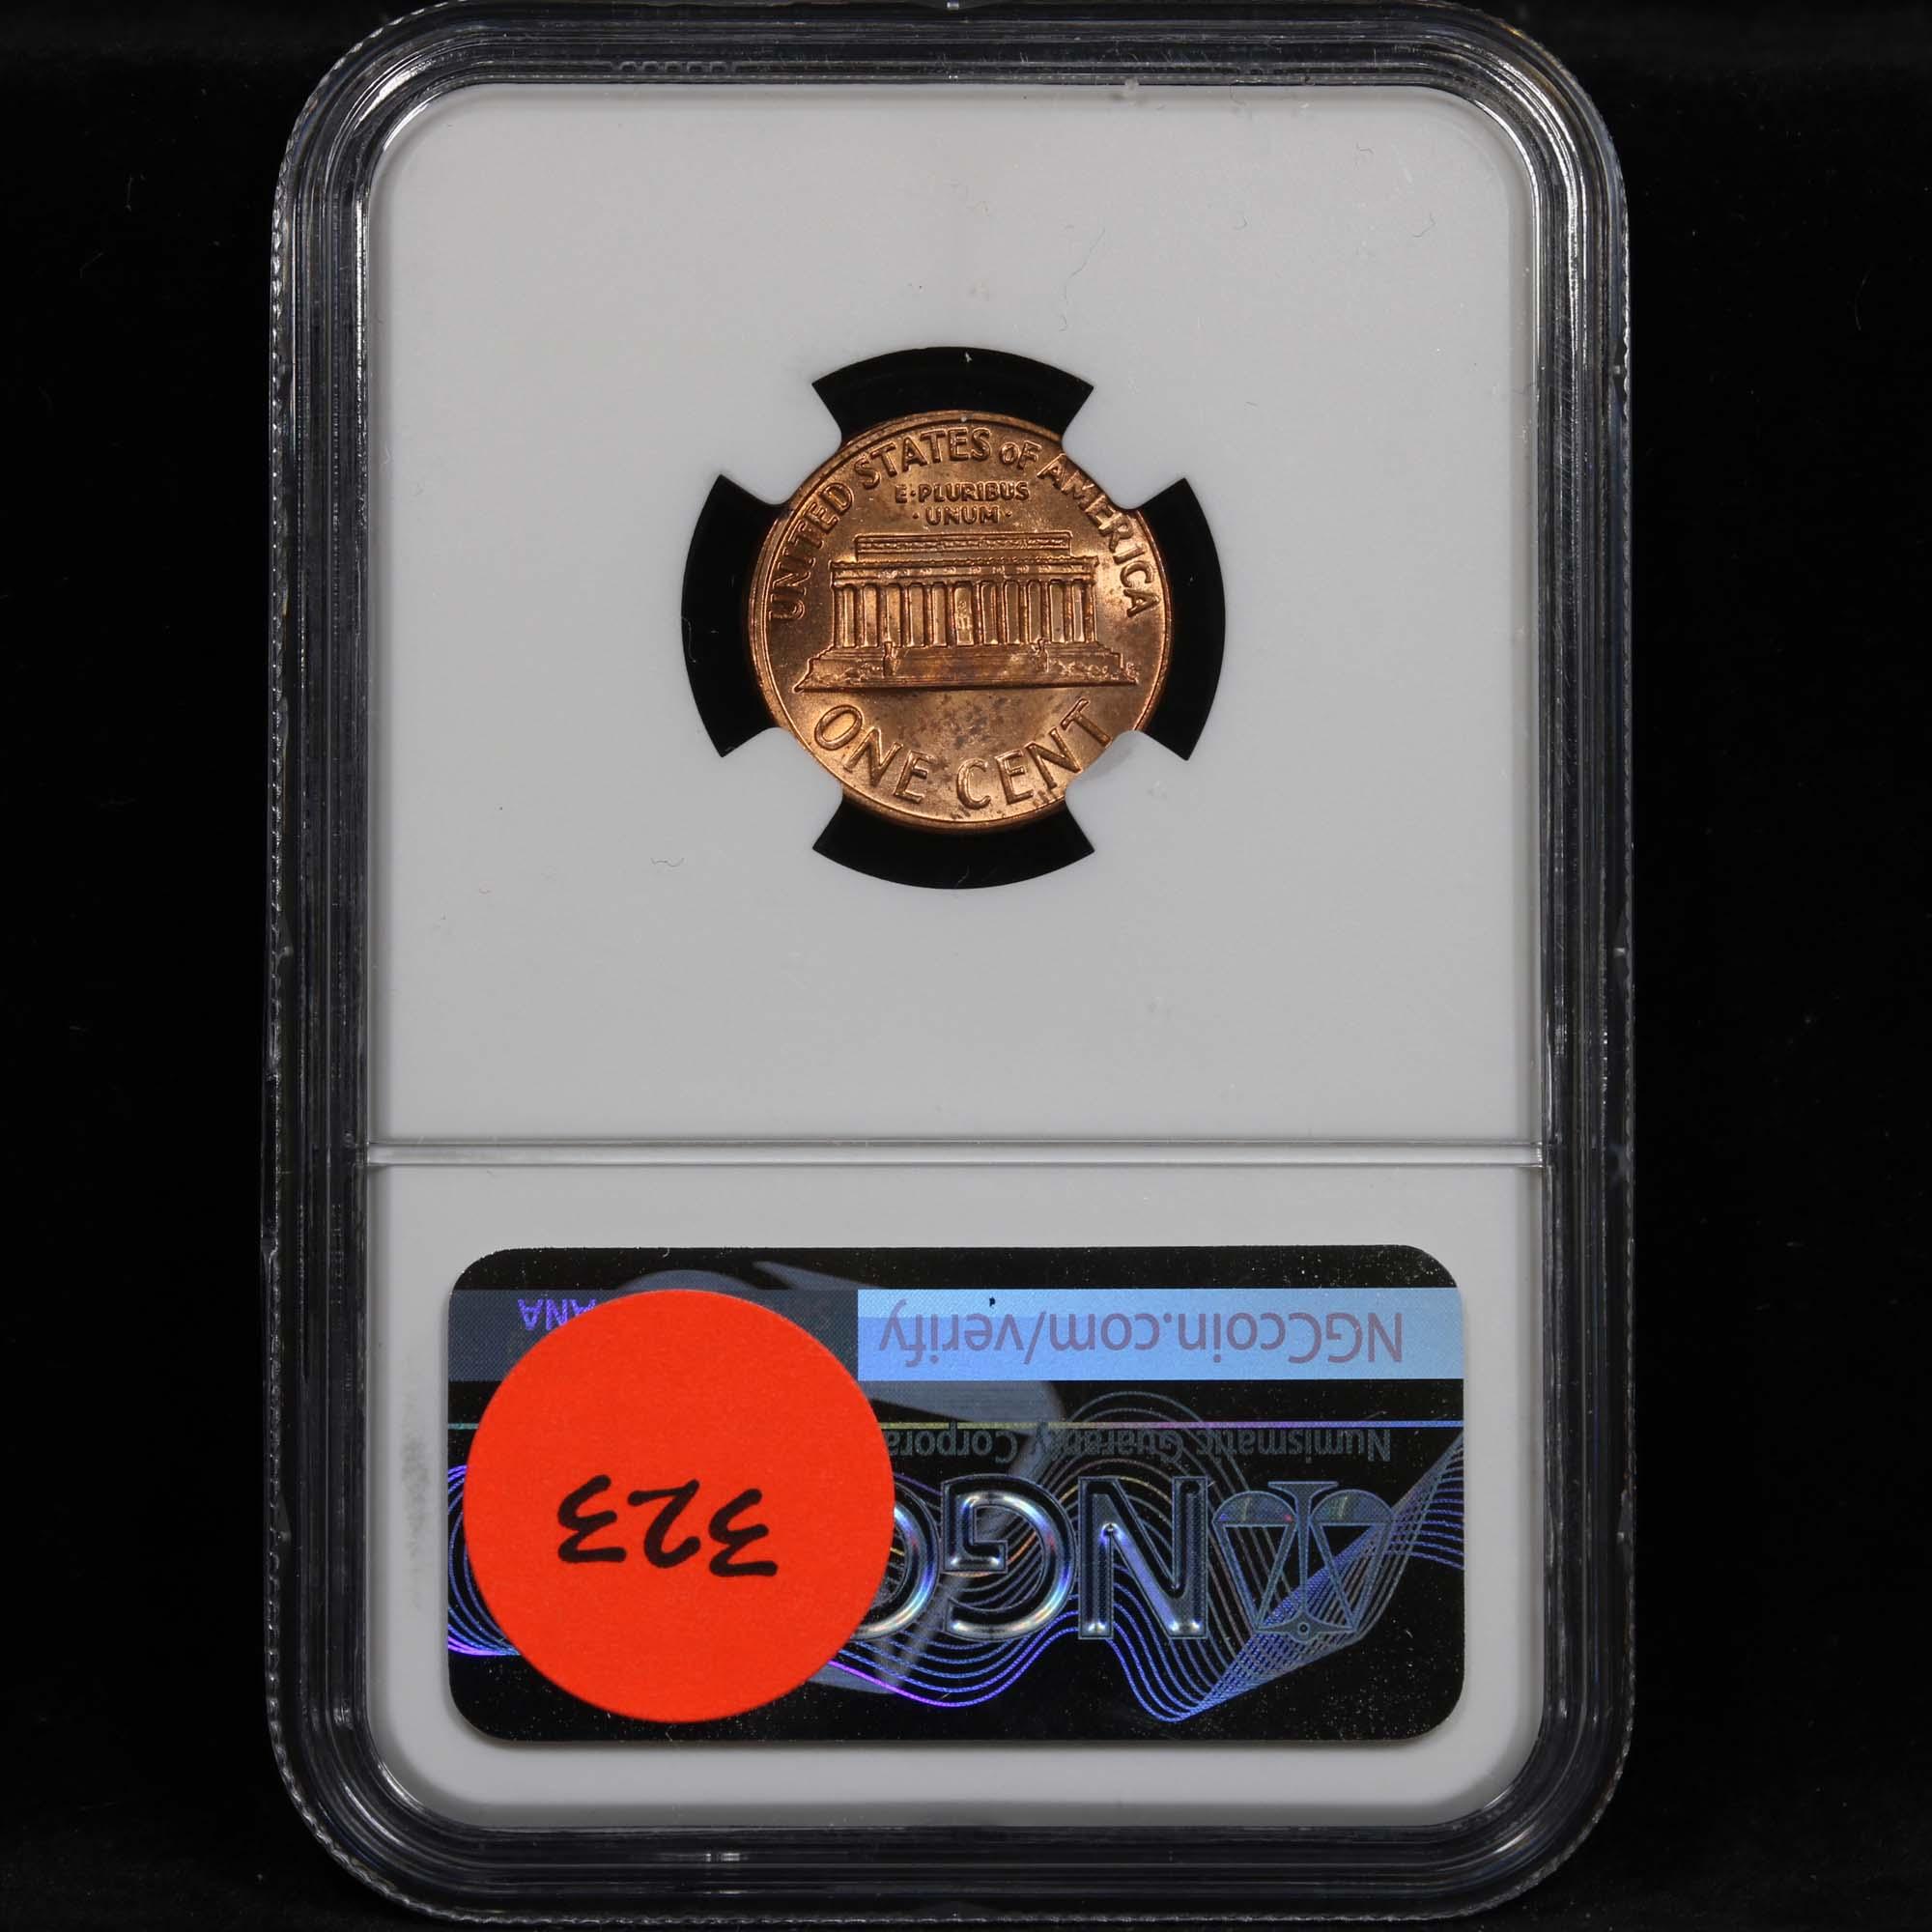 ***Auction Highlight*** NGC 1971-d Mint Error, Obv Indent Lincoln Cent 1c Graded ms64 RD by NGC (fc)